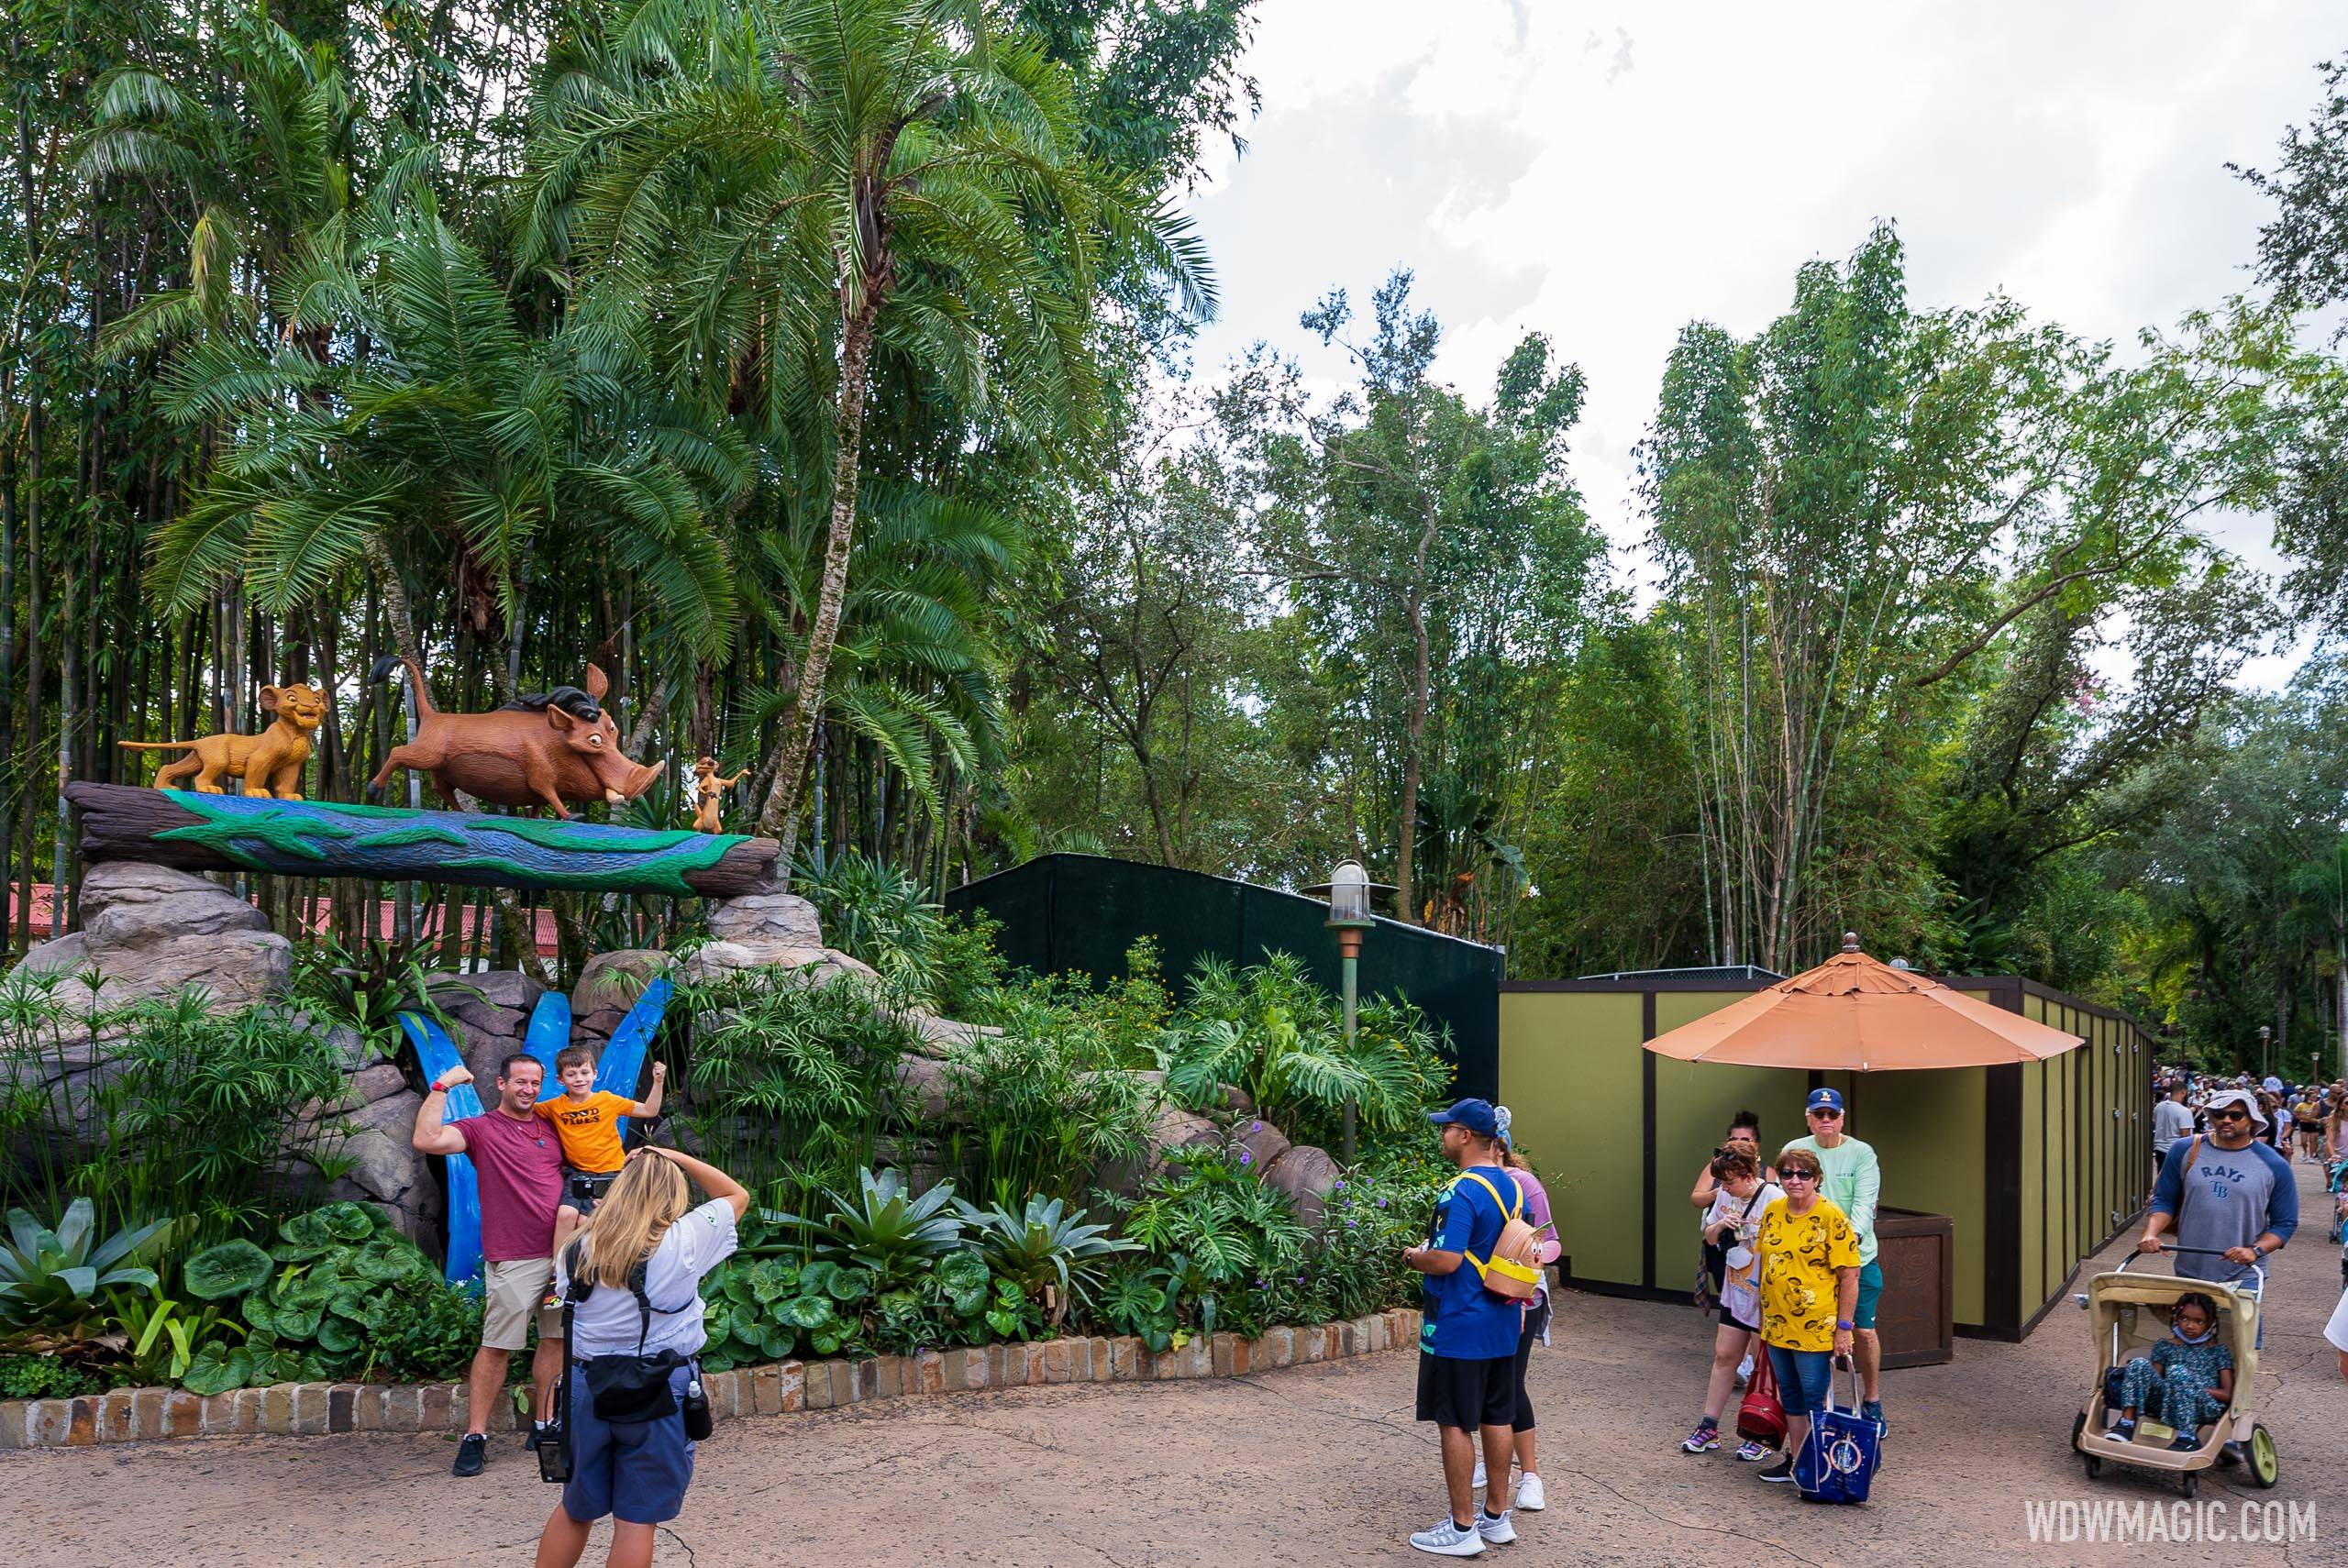 Construction walls on Discovery Island - October 10 2021